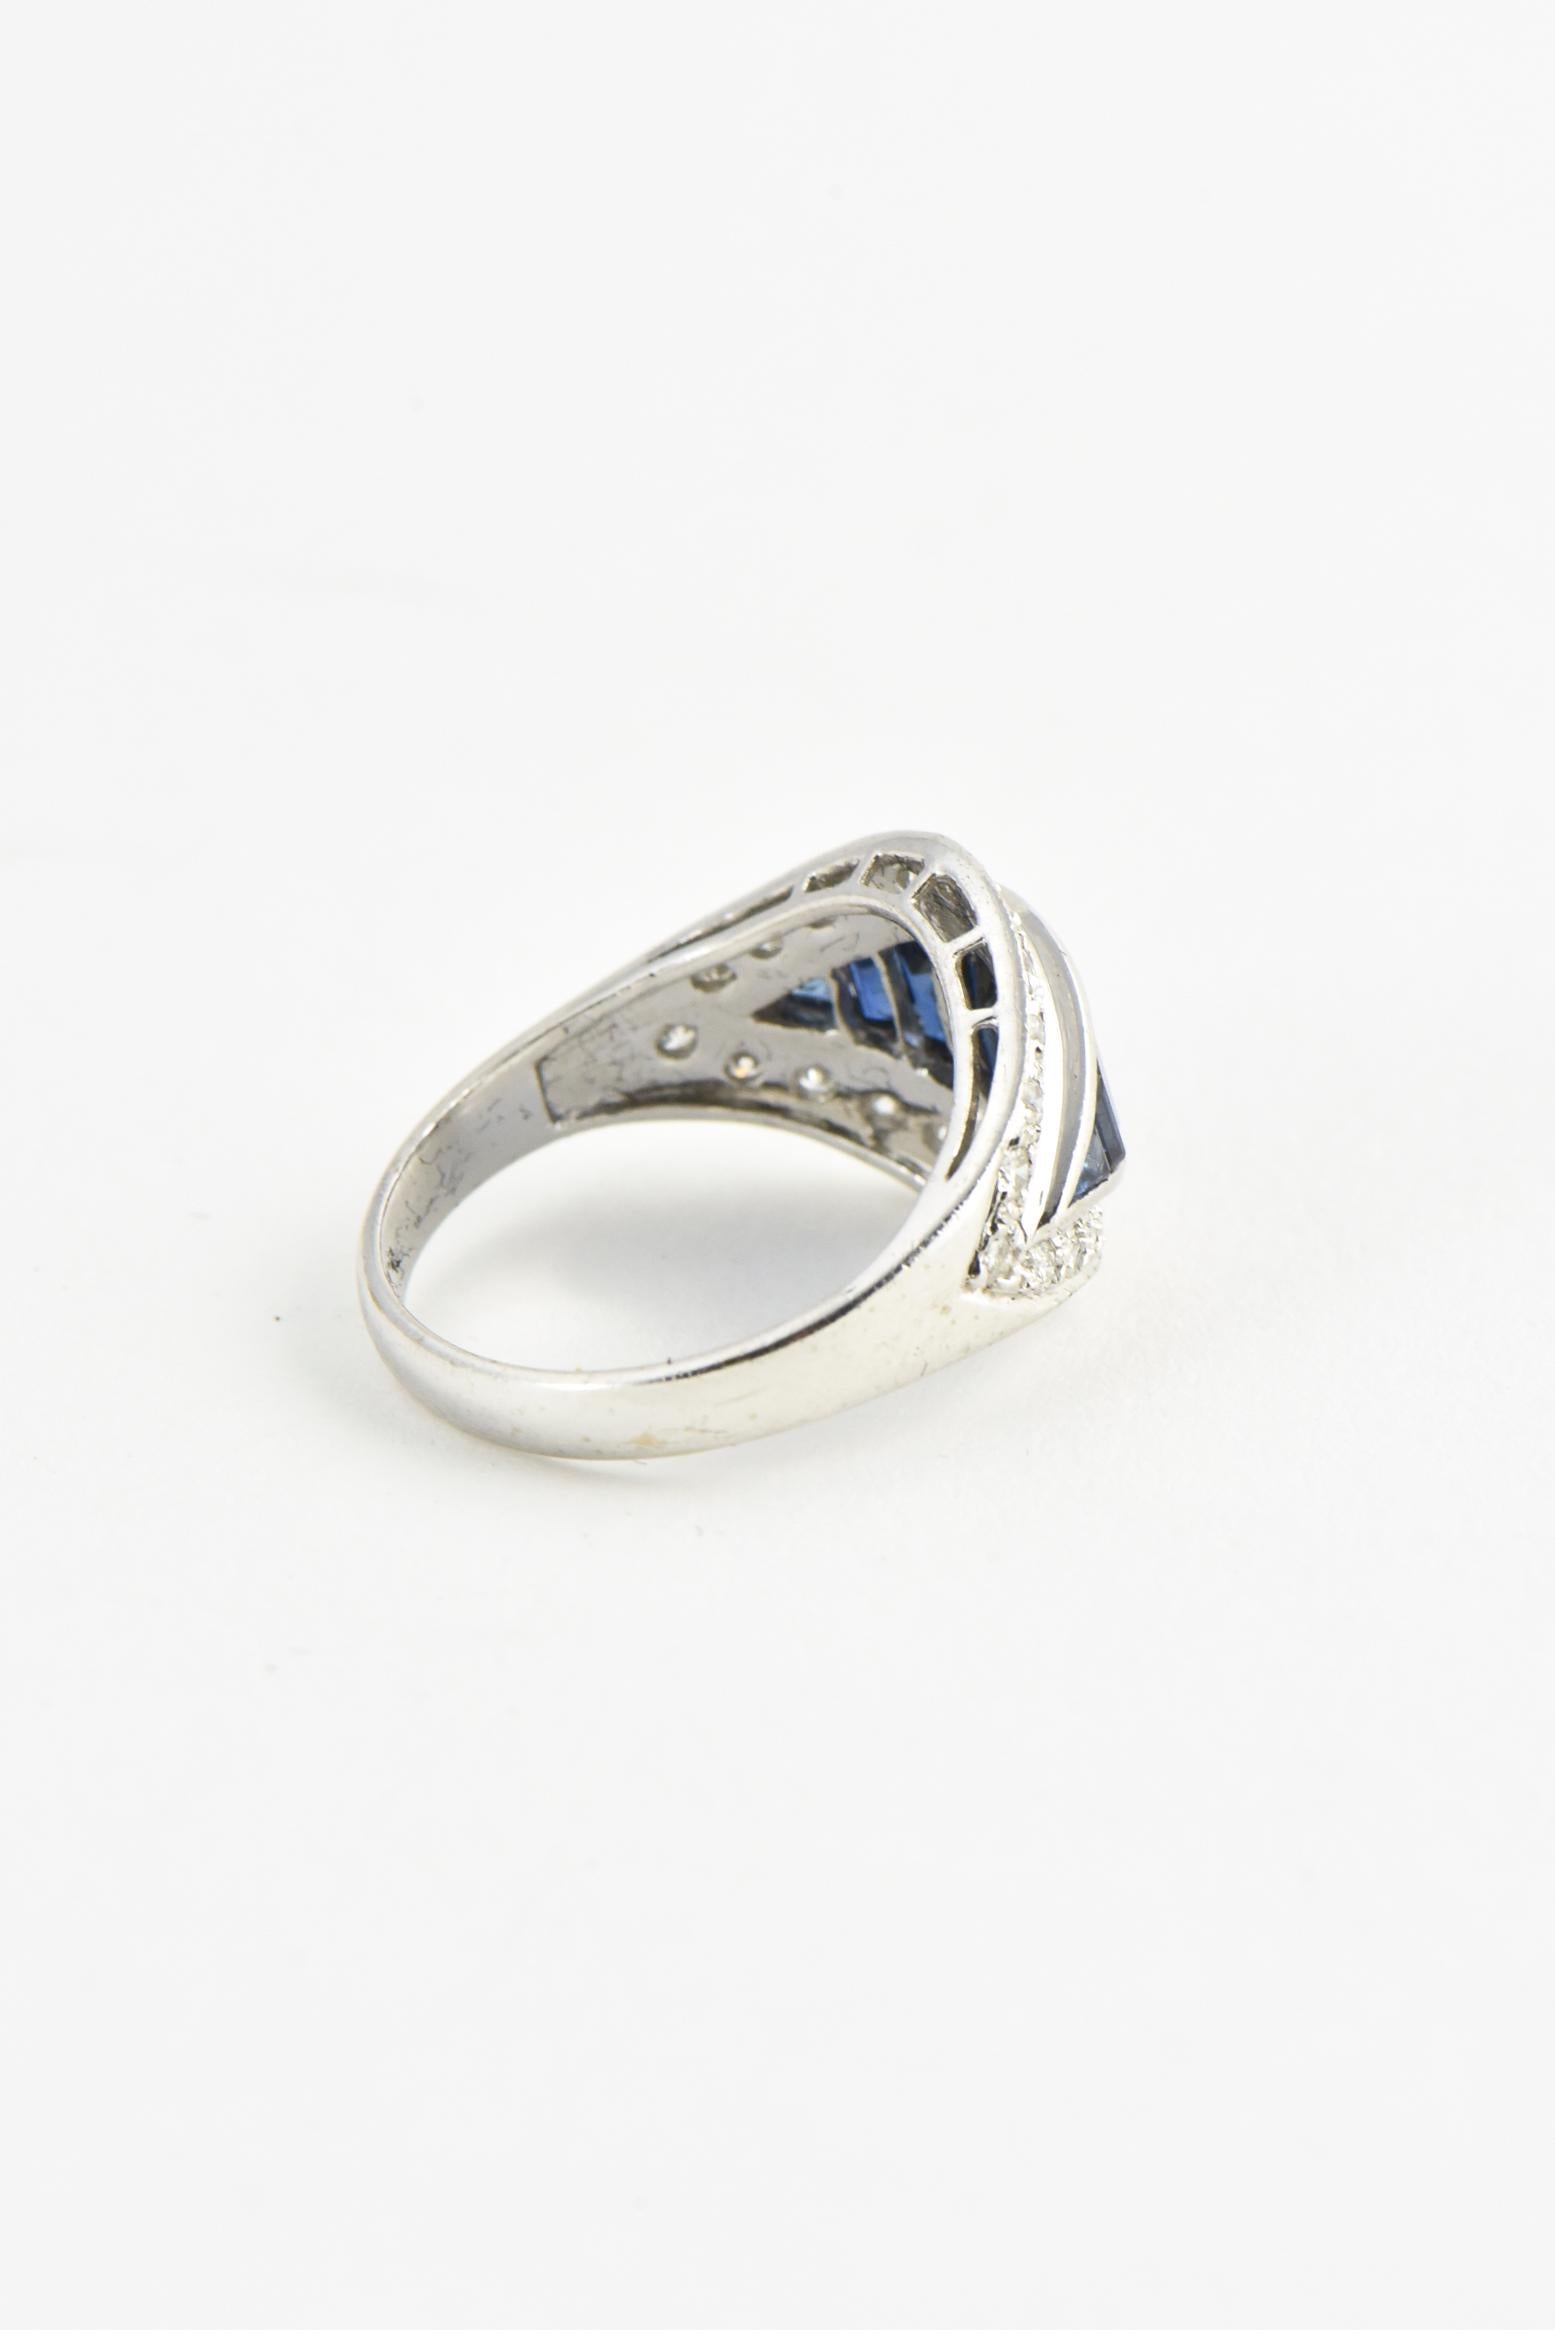 Deco Style Sapphire and Diamond White Gold Ring For Sale 4